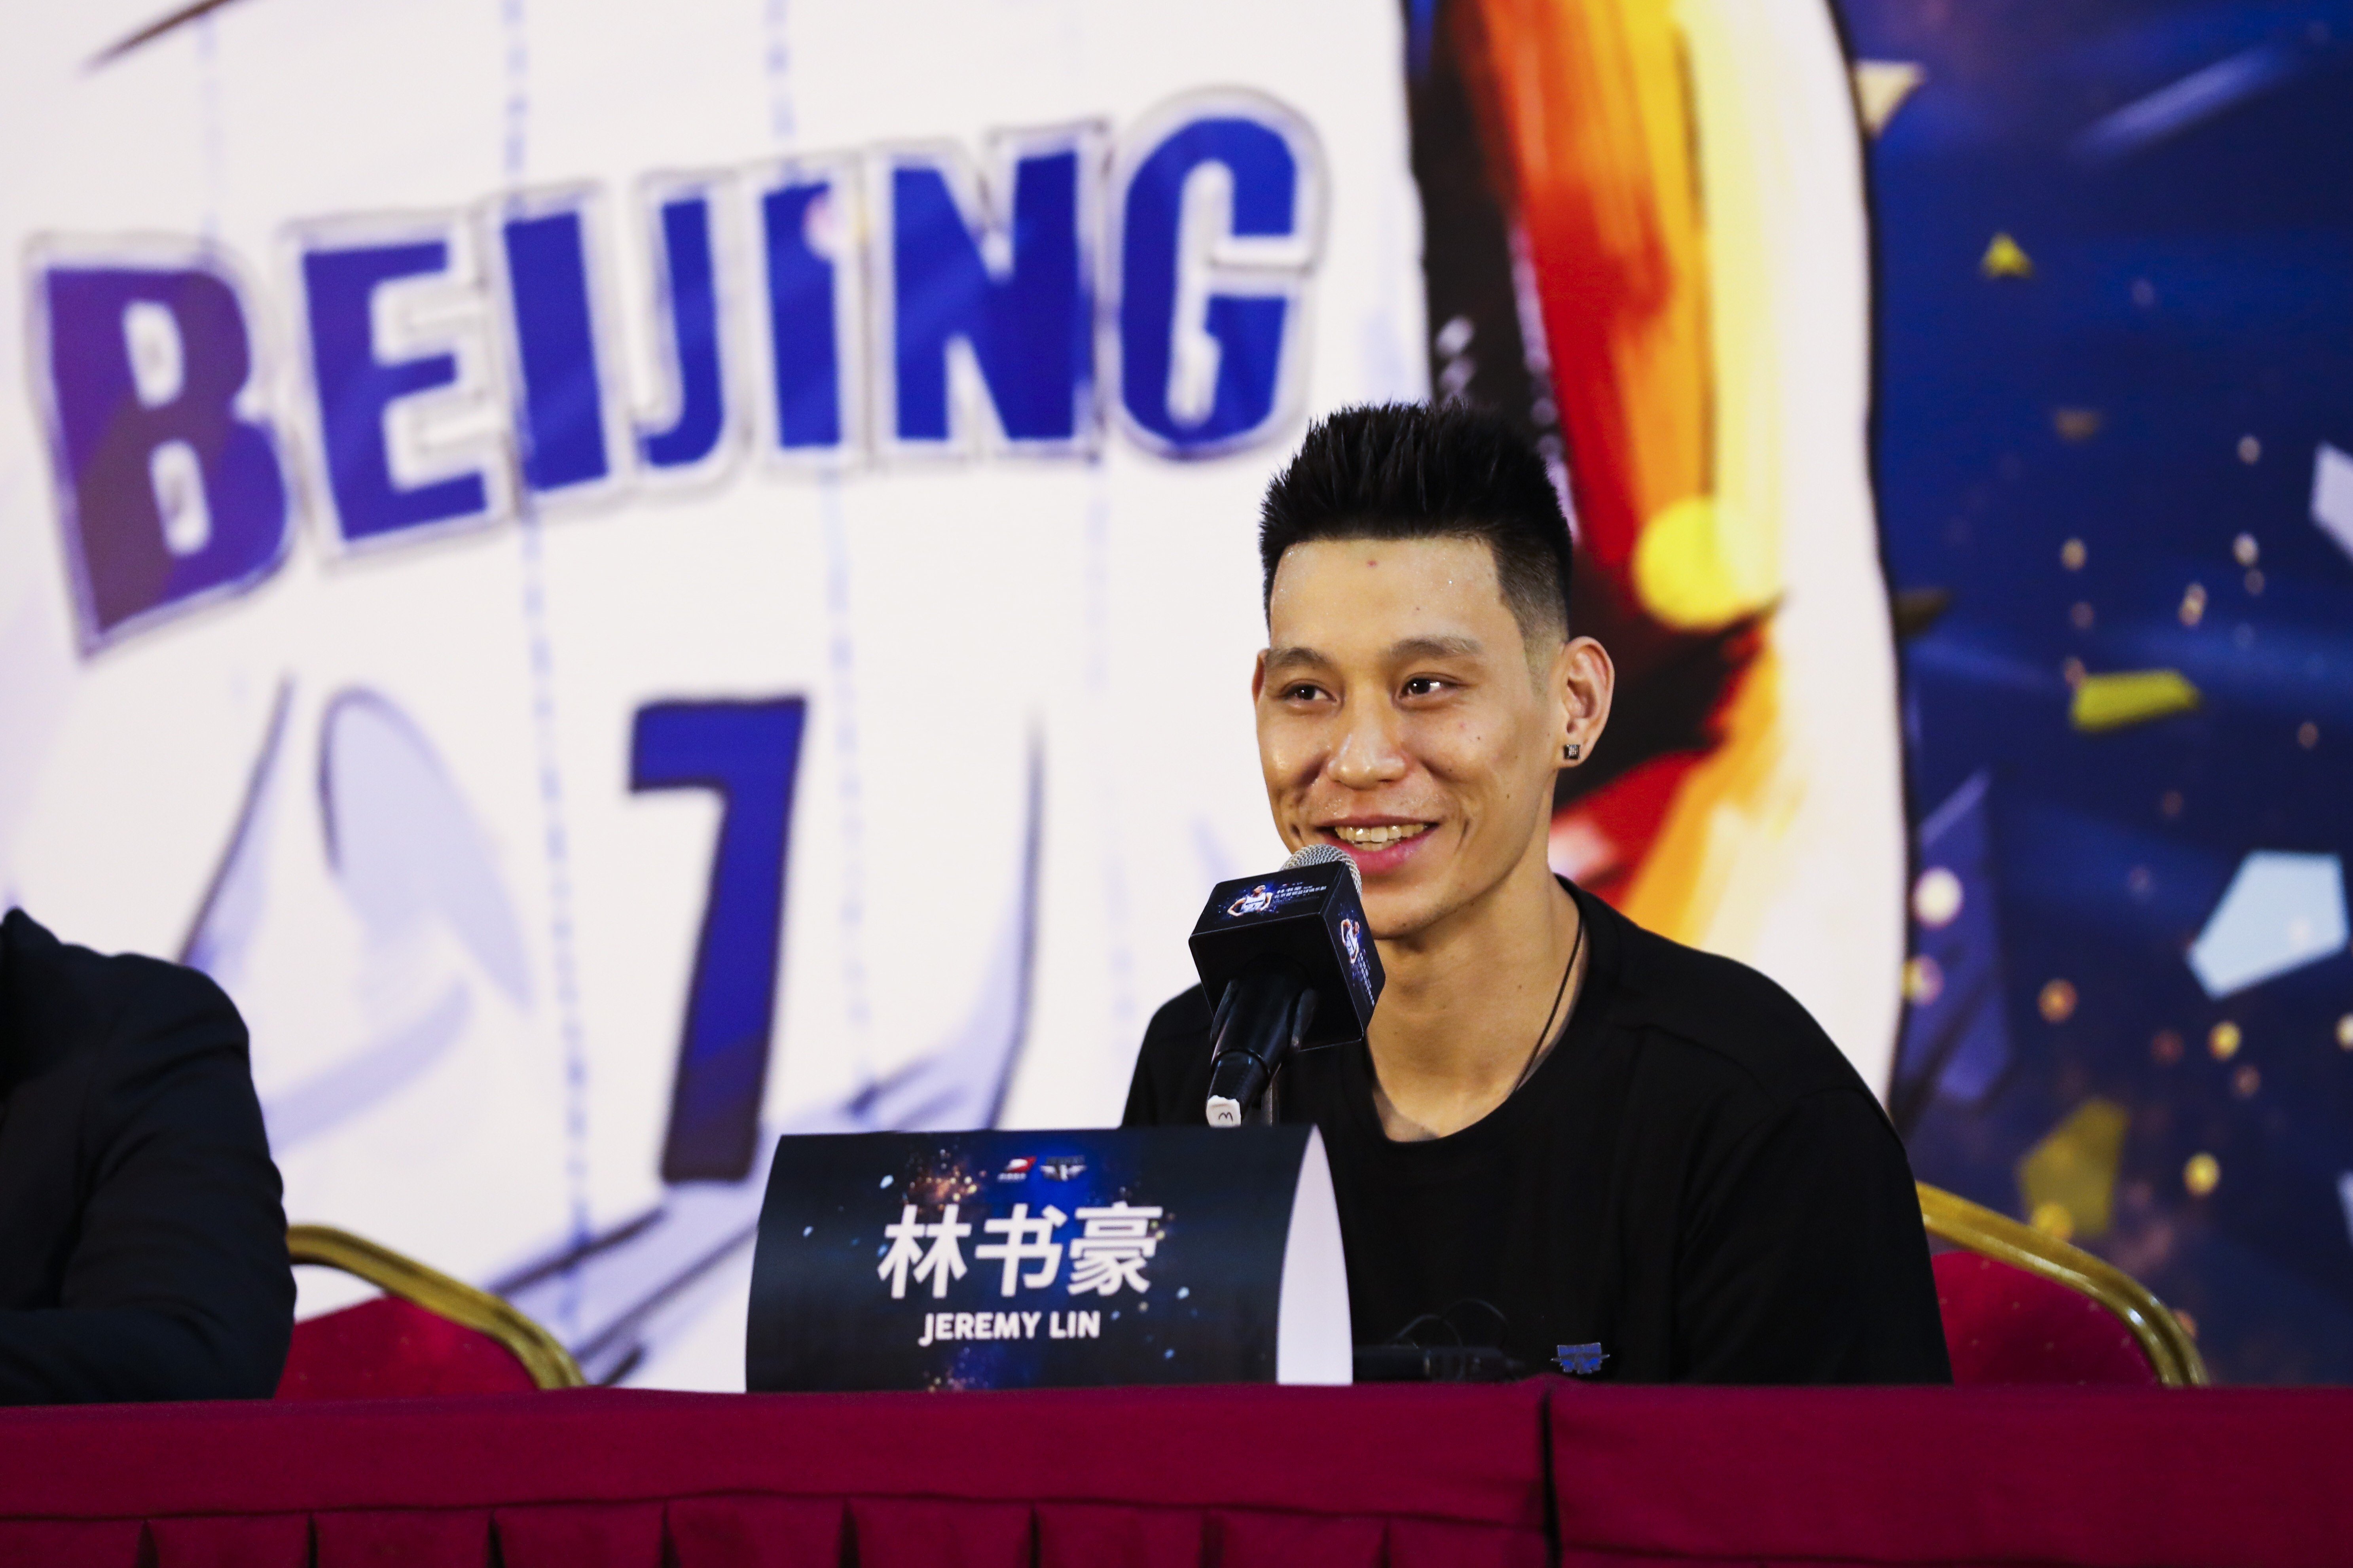 Jeremy Lin speaks to the press at a Beijing Ducks media conference in 2019. Lin may return to China after his NBA dream ended without a contract. Photo: VCG/VCG via Getty Images